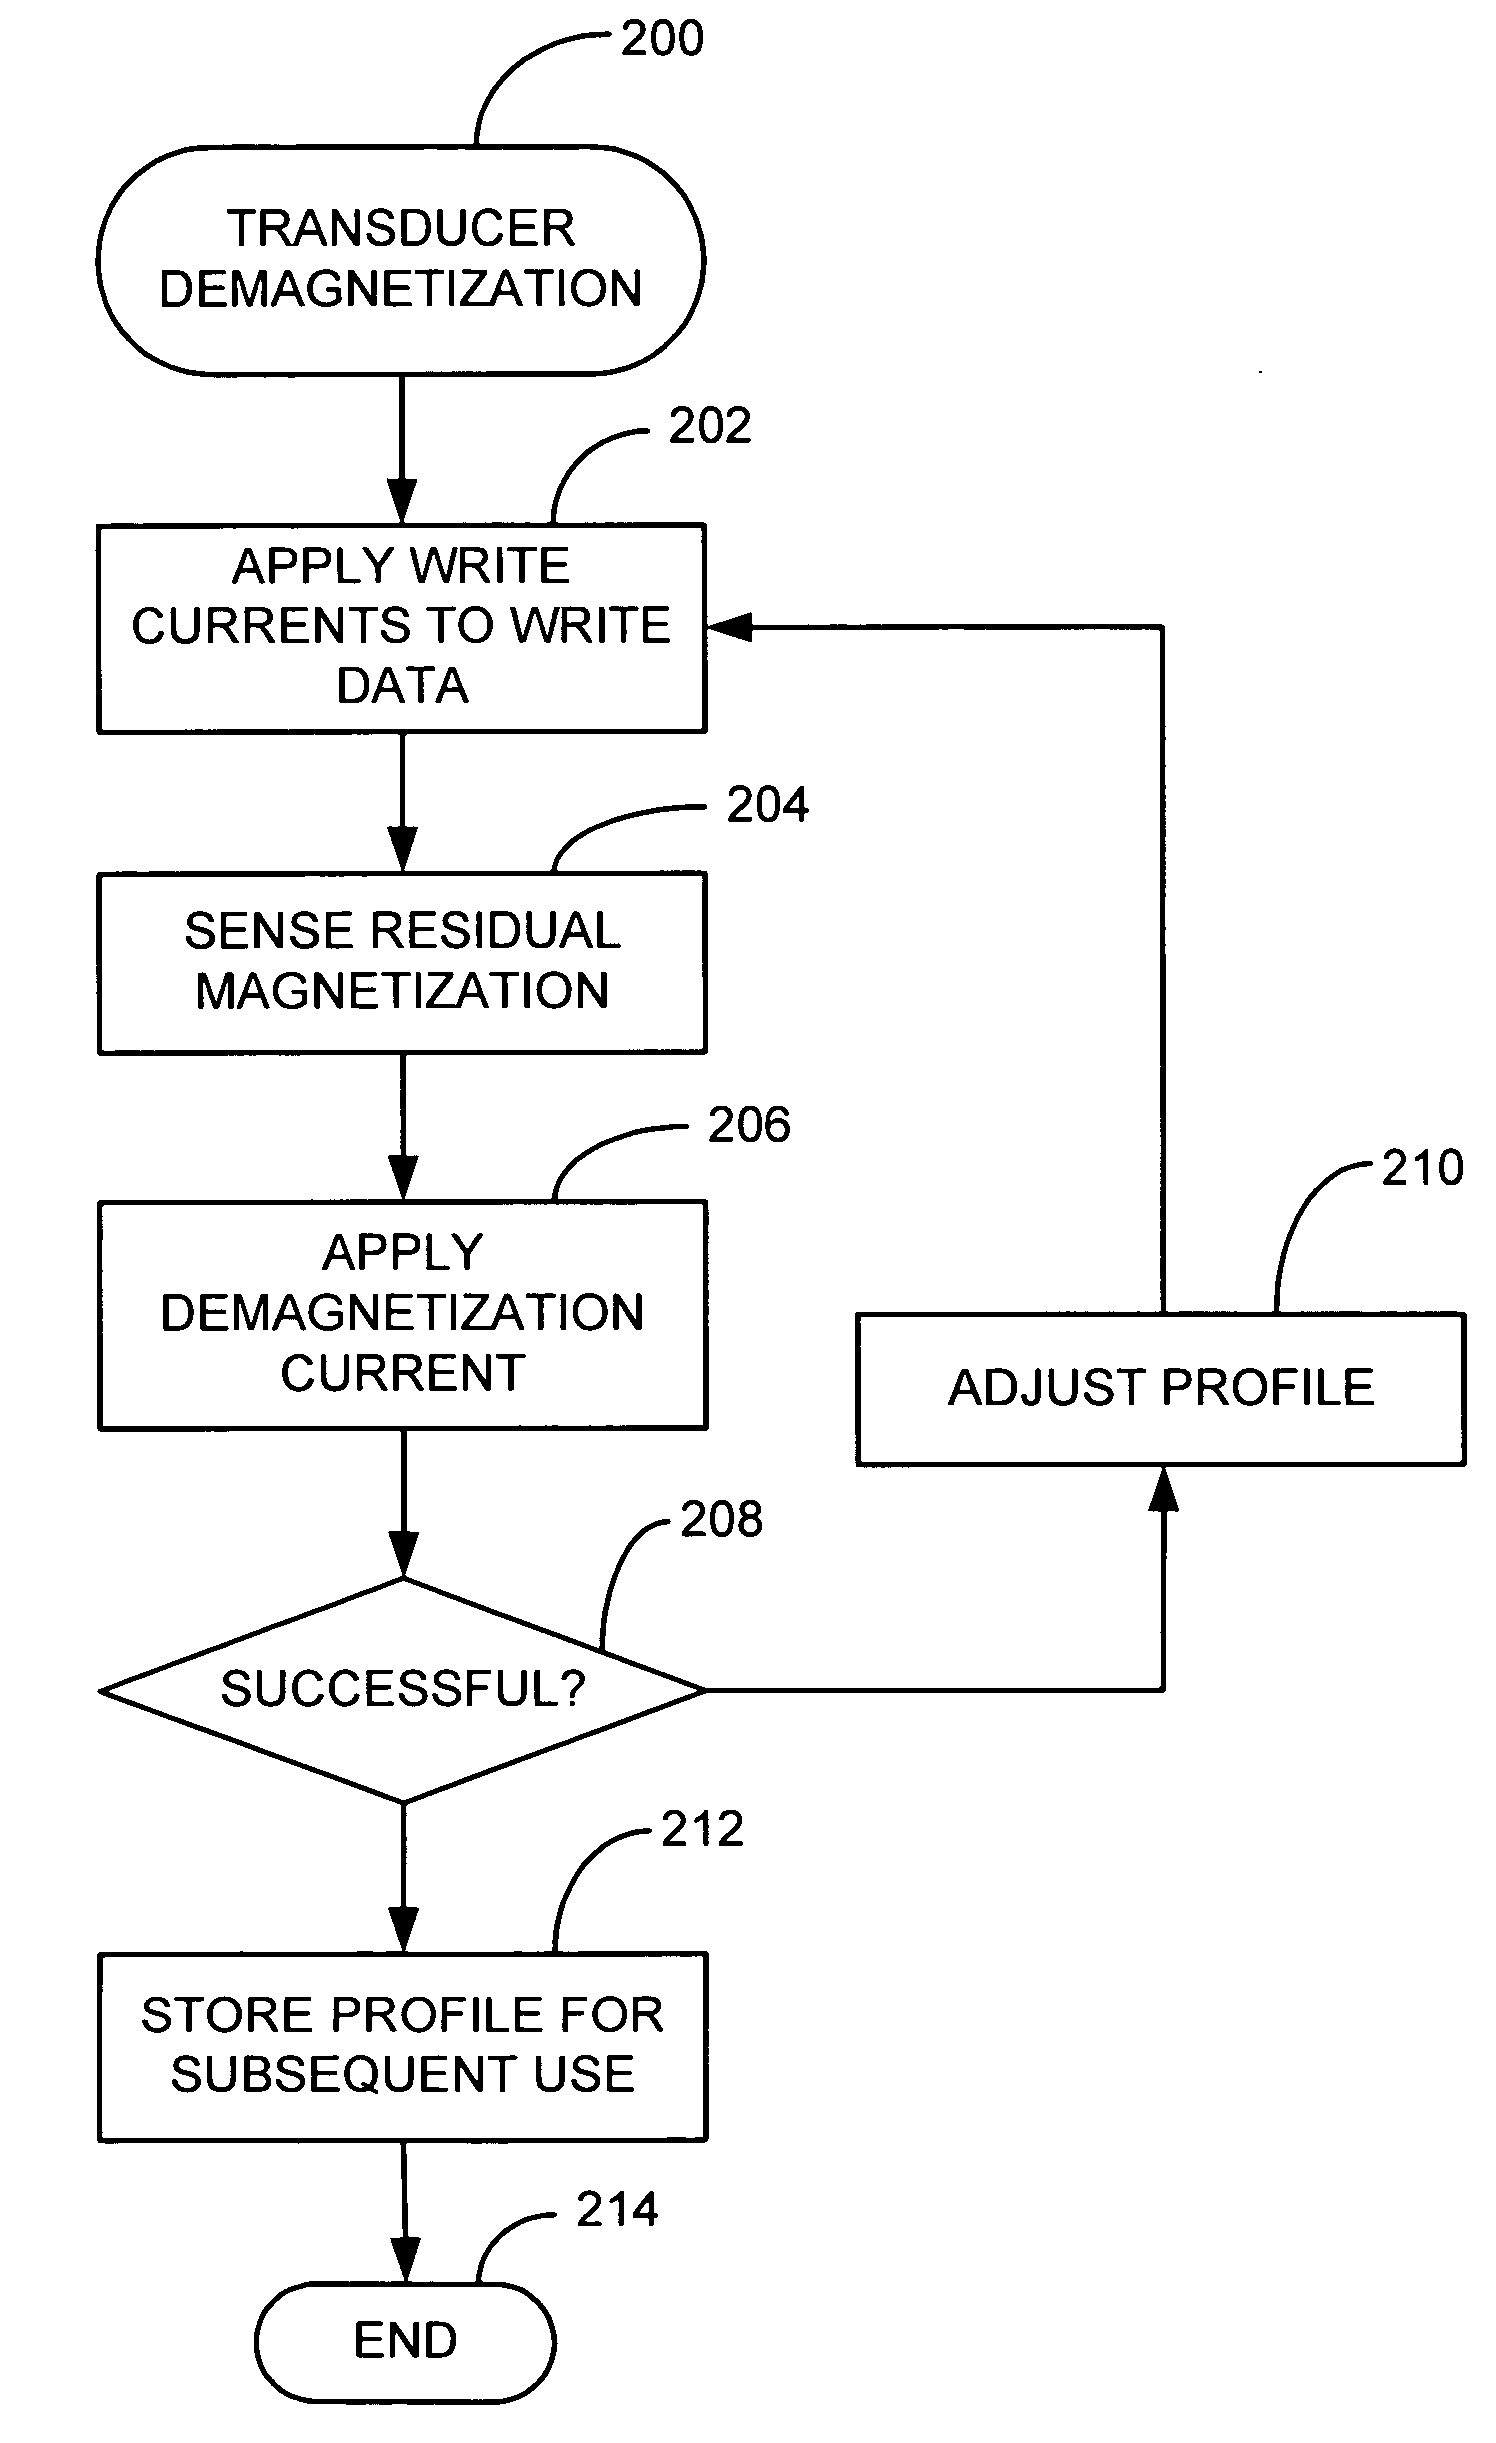 Removing residual magnetization in a data transducer